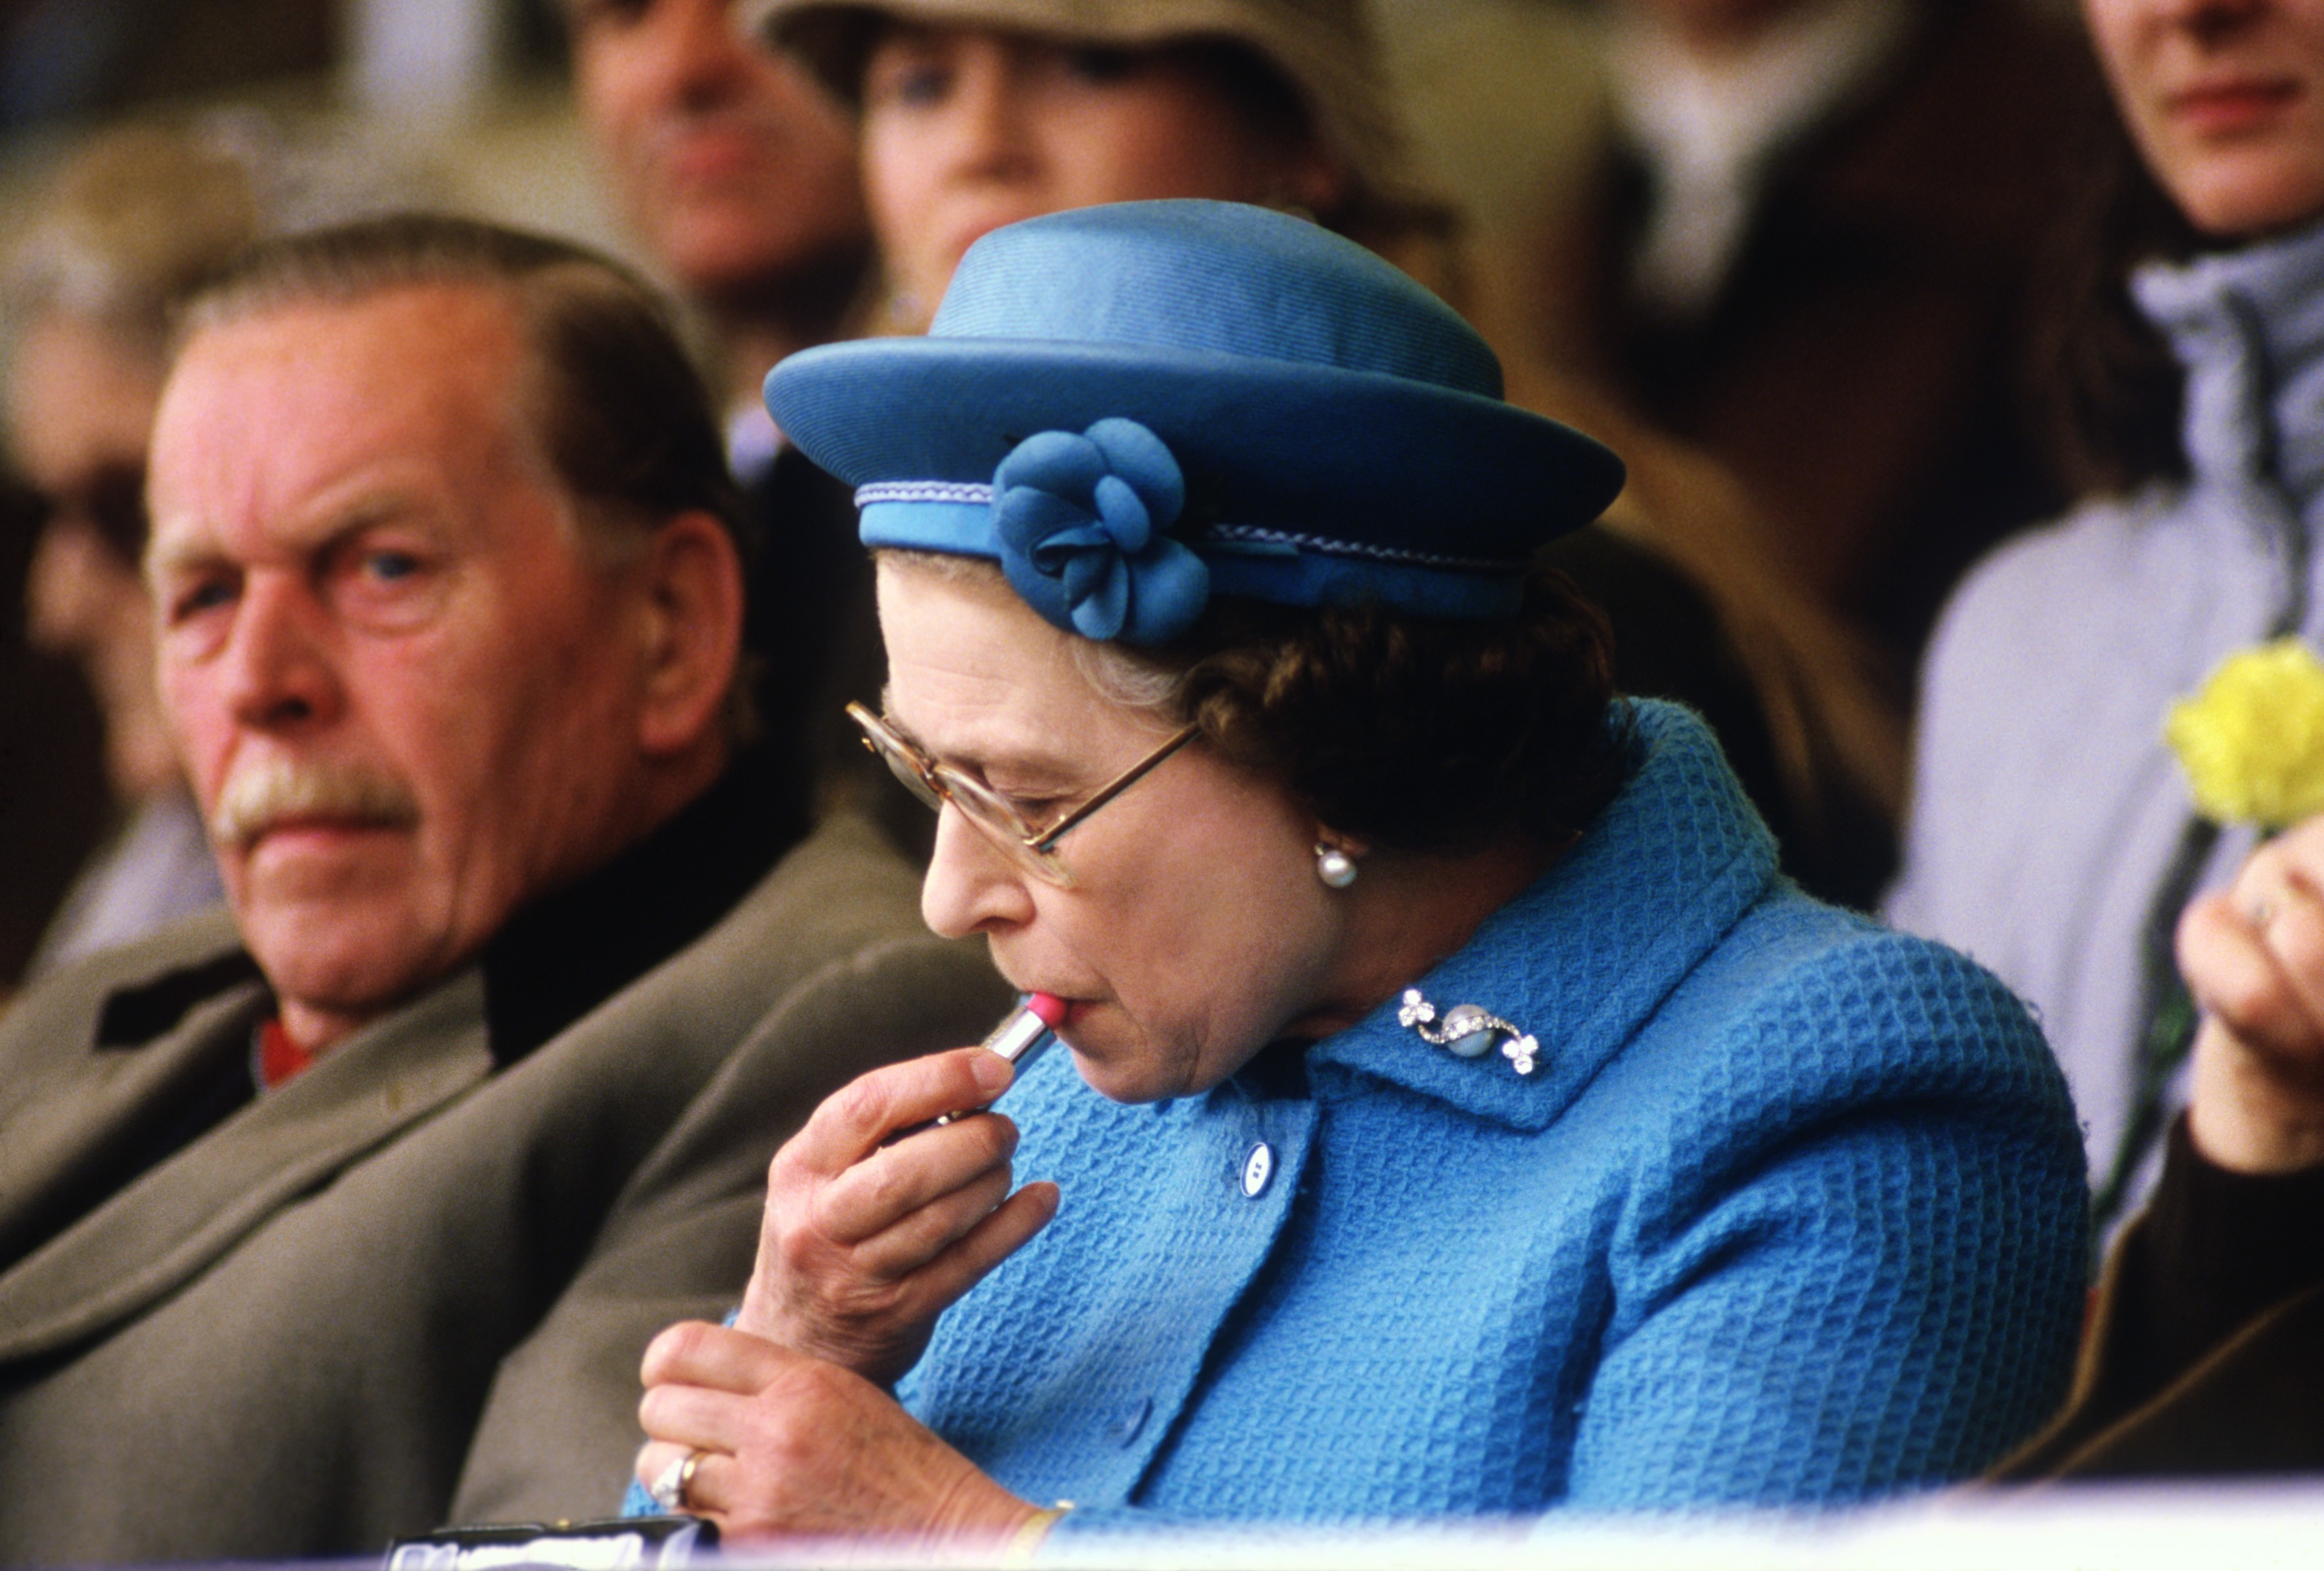 WINDSOR - MAY 11:   Queen Elizabeth II puts on lipstick in the Royal Box at the Windsor Horse Show on May 11, 1985. Prince Phillip was about to enter the dressage ring with his horse team.  (Photo by David Levenson/Getty Images) (Foto: Getty Images)